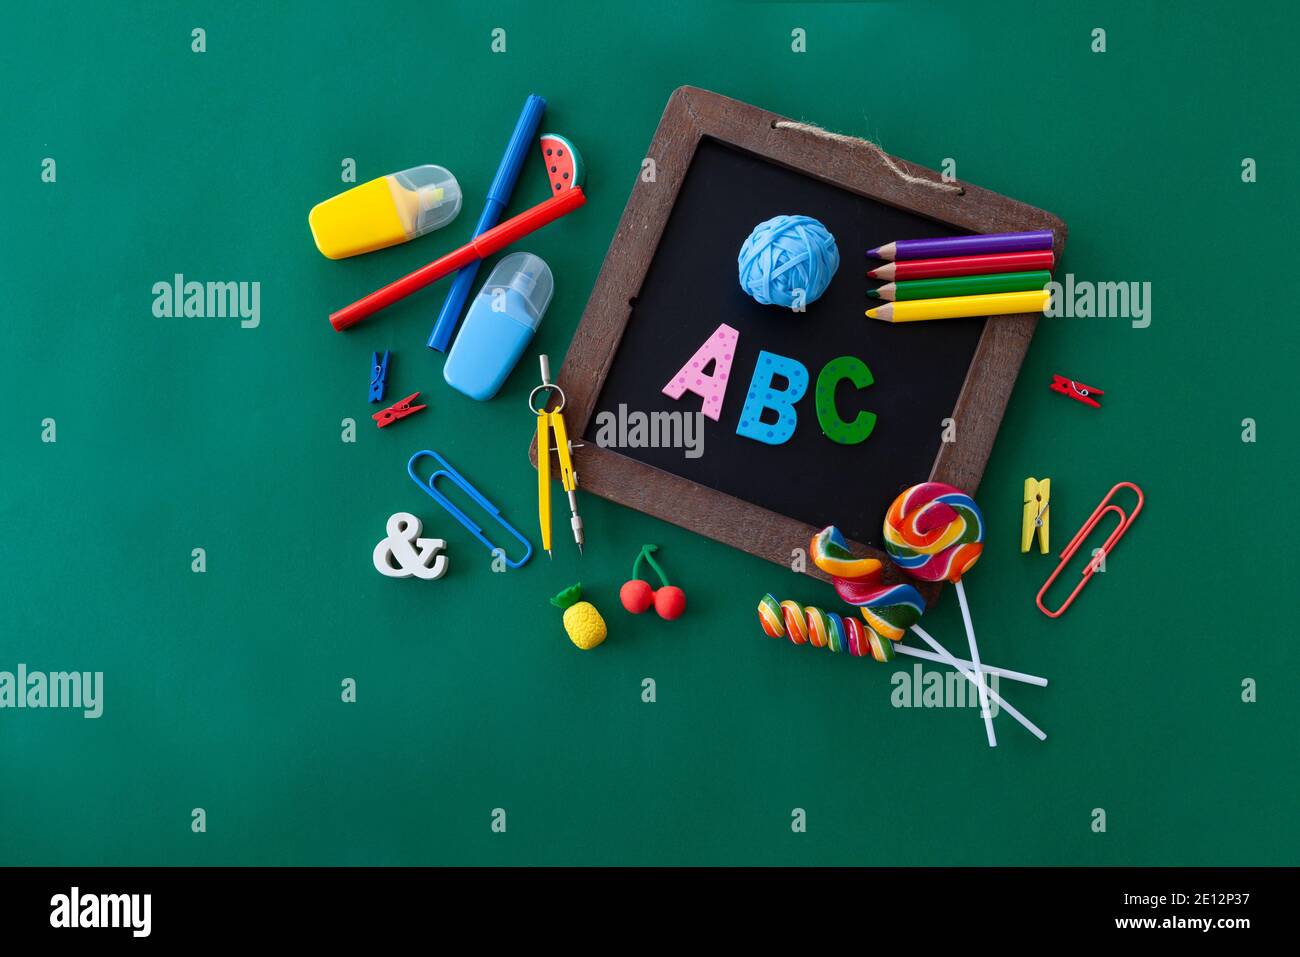 Colorful Background With School Supplies Stock Photo